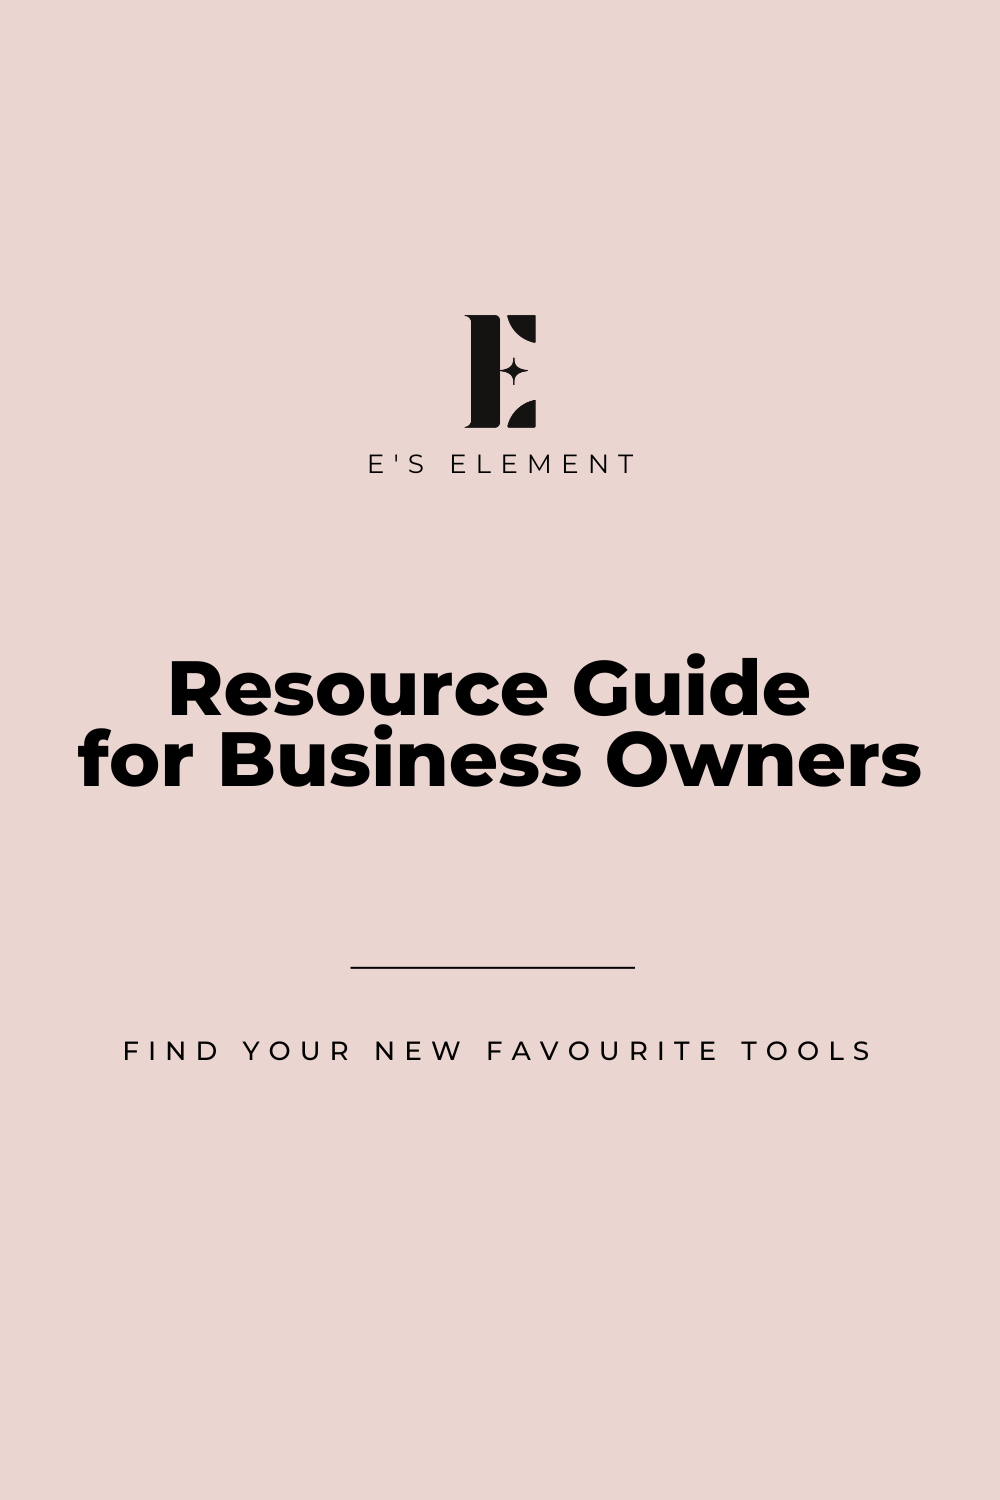 resource guide by e's element